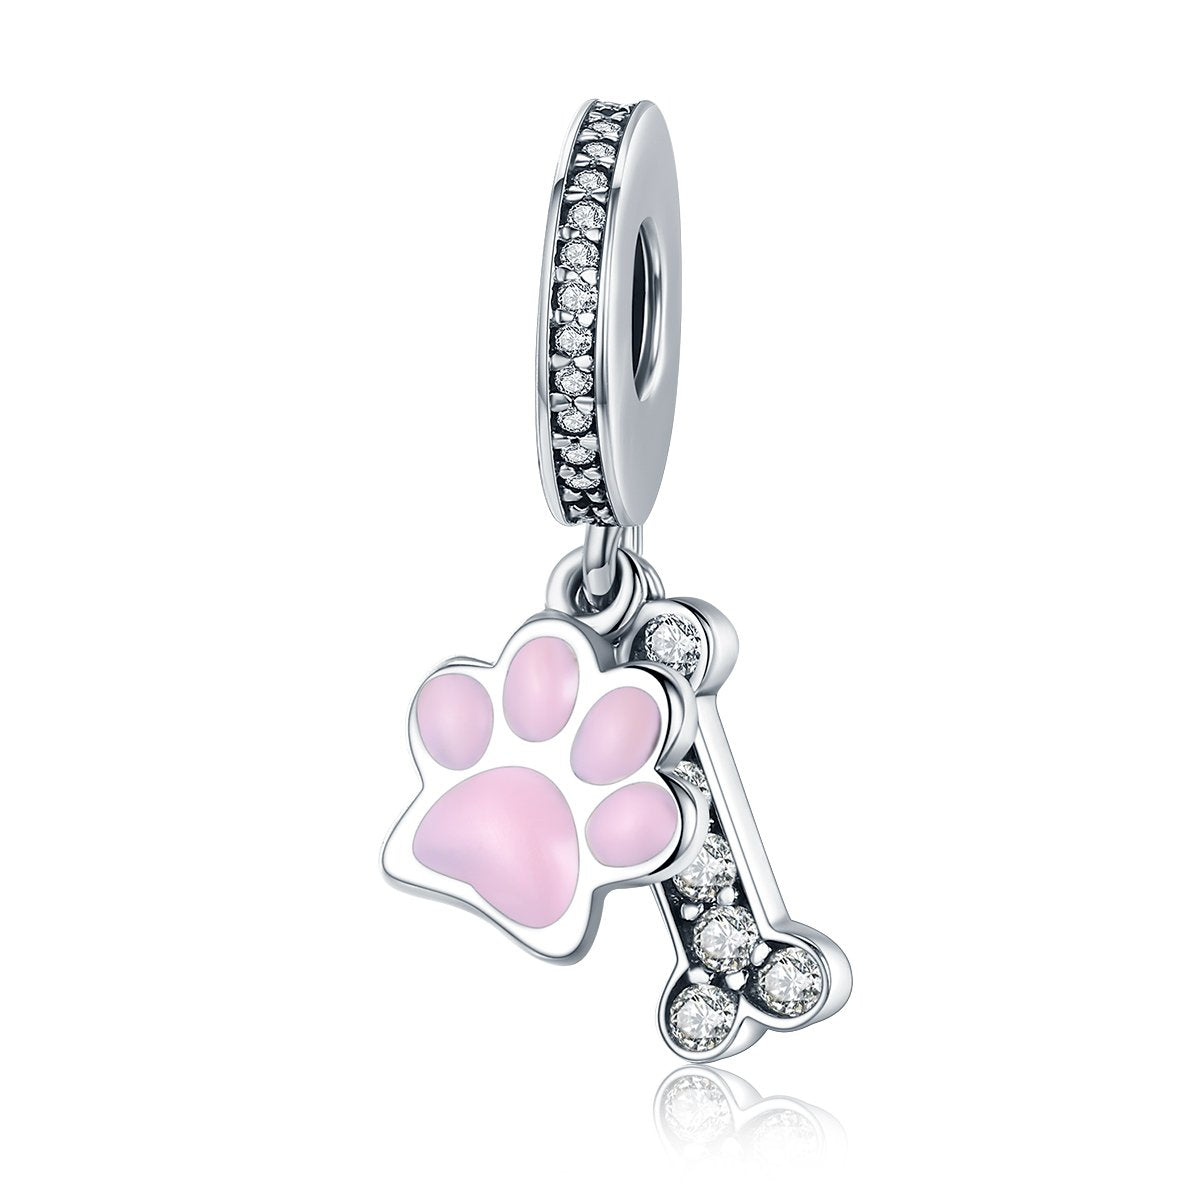 Sterling 925 silver charm the pink paw bead pendant fits Pandora charm and European charm bracelet Xaxe.com